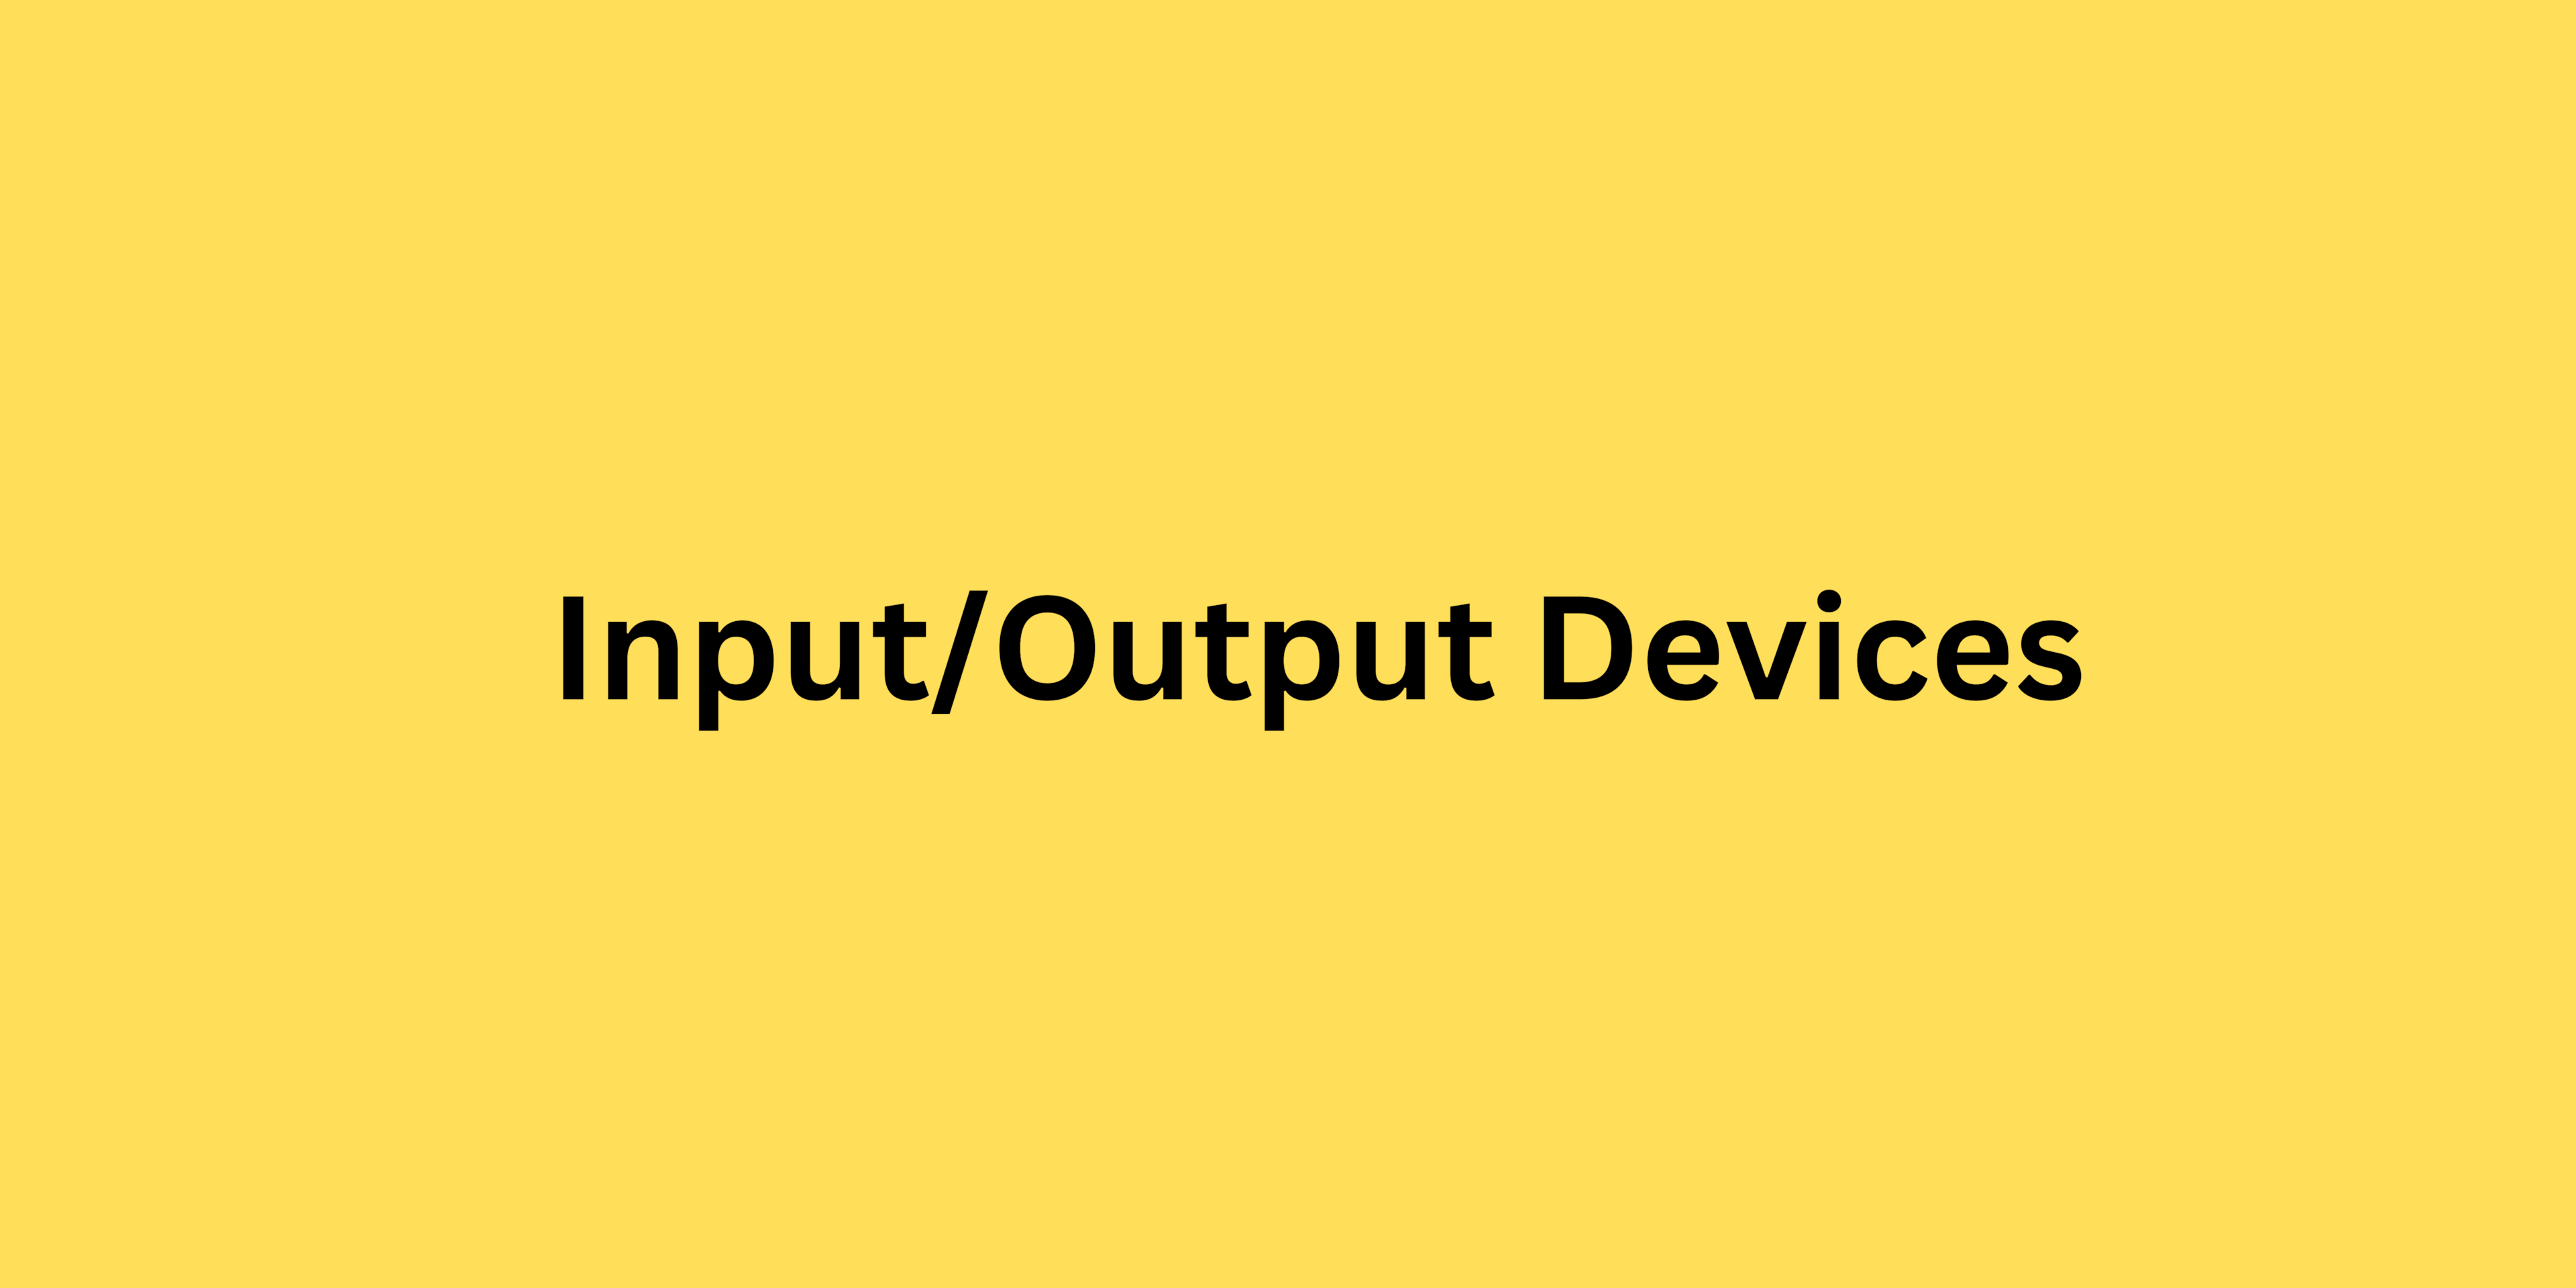 Input/Output Devices: